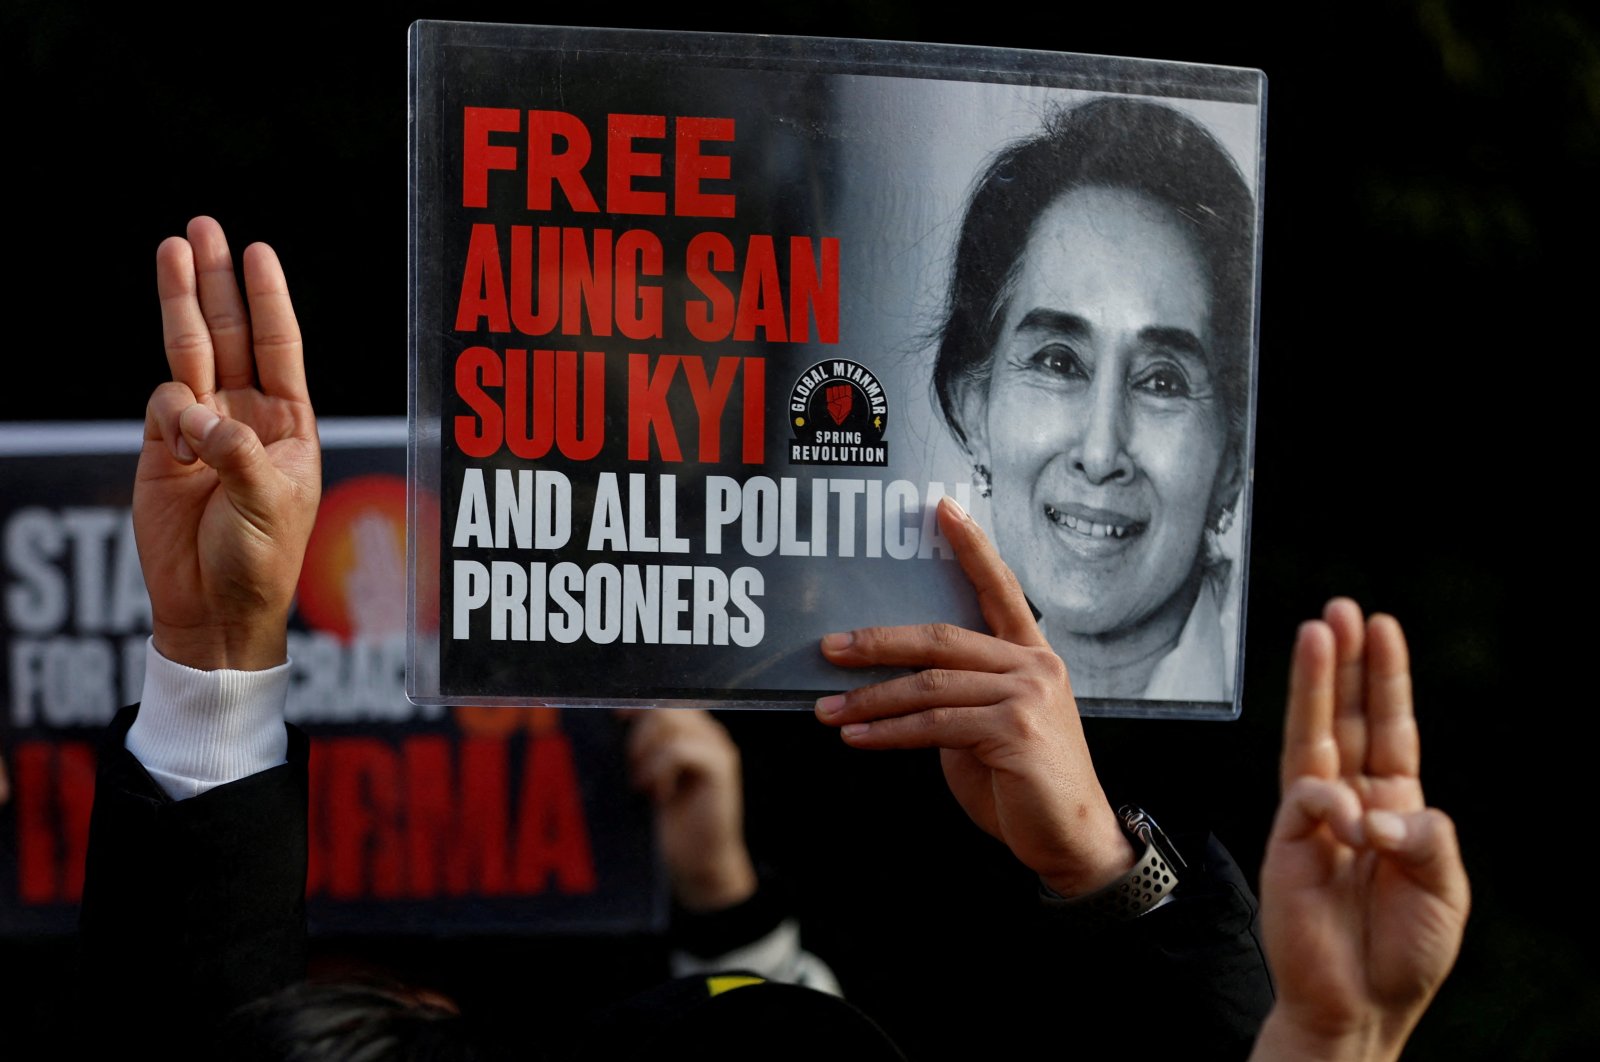 Myanmar protesters residing in Japan show off the portrait of Aung San Suu Kyi and raise three-finger salutes, during a rally to mark the second anniversary of Myanmar&#039;s 2021 military coup, outside the Embassy of Myanmar in Tokyo, Japan, Feb. 1, 2023. (Reuters Photo)